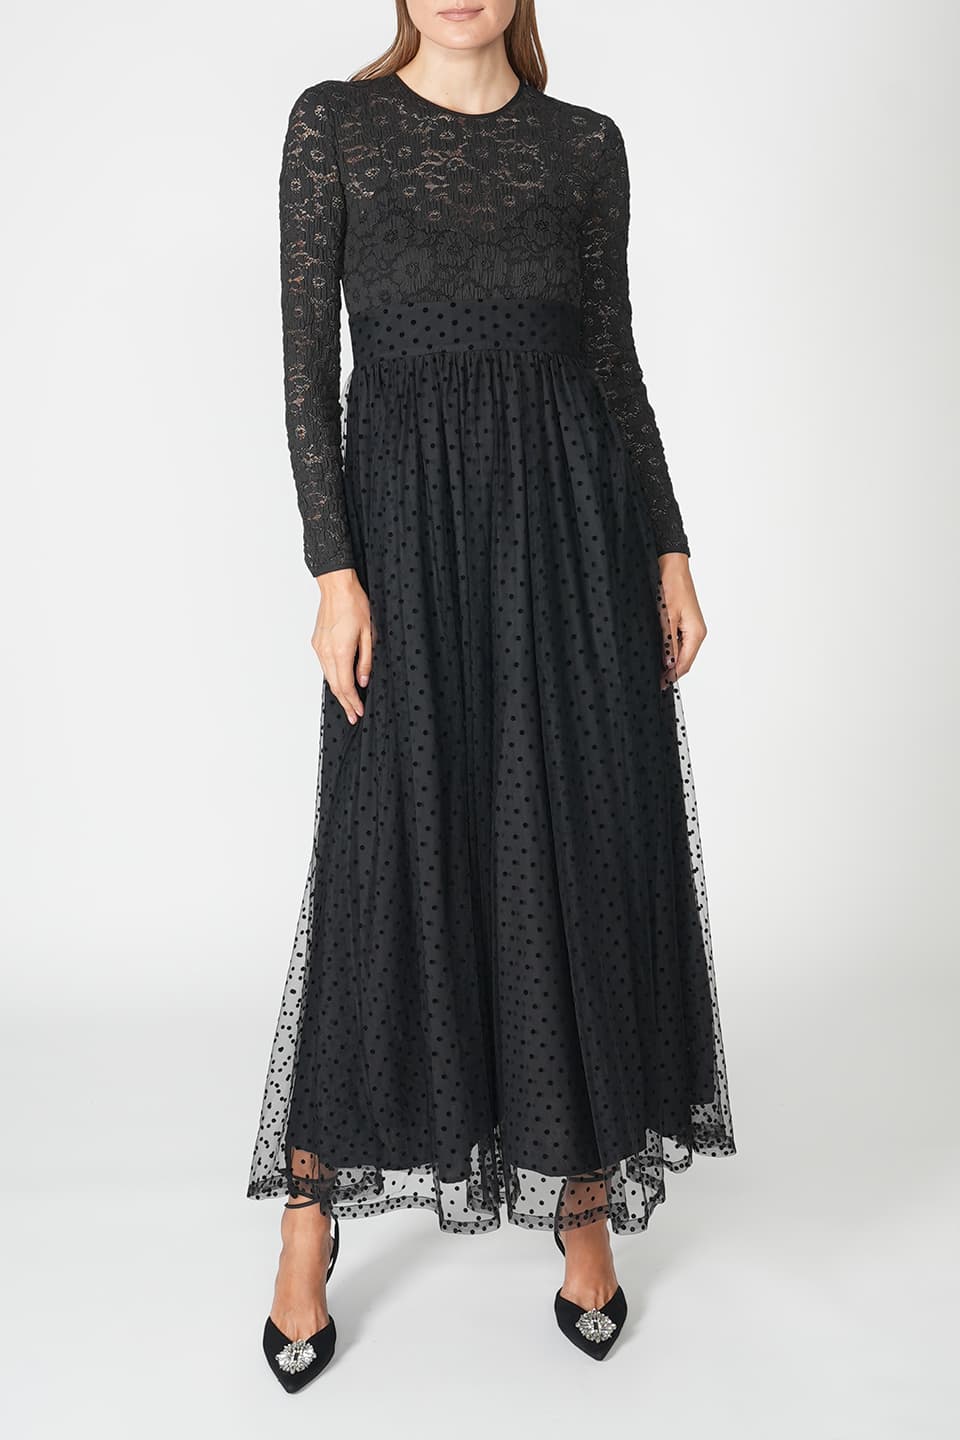 Shop online trendy Black Maxi dresses from Manoush Fashion designer. Product gallery 1